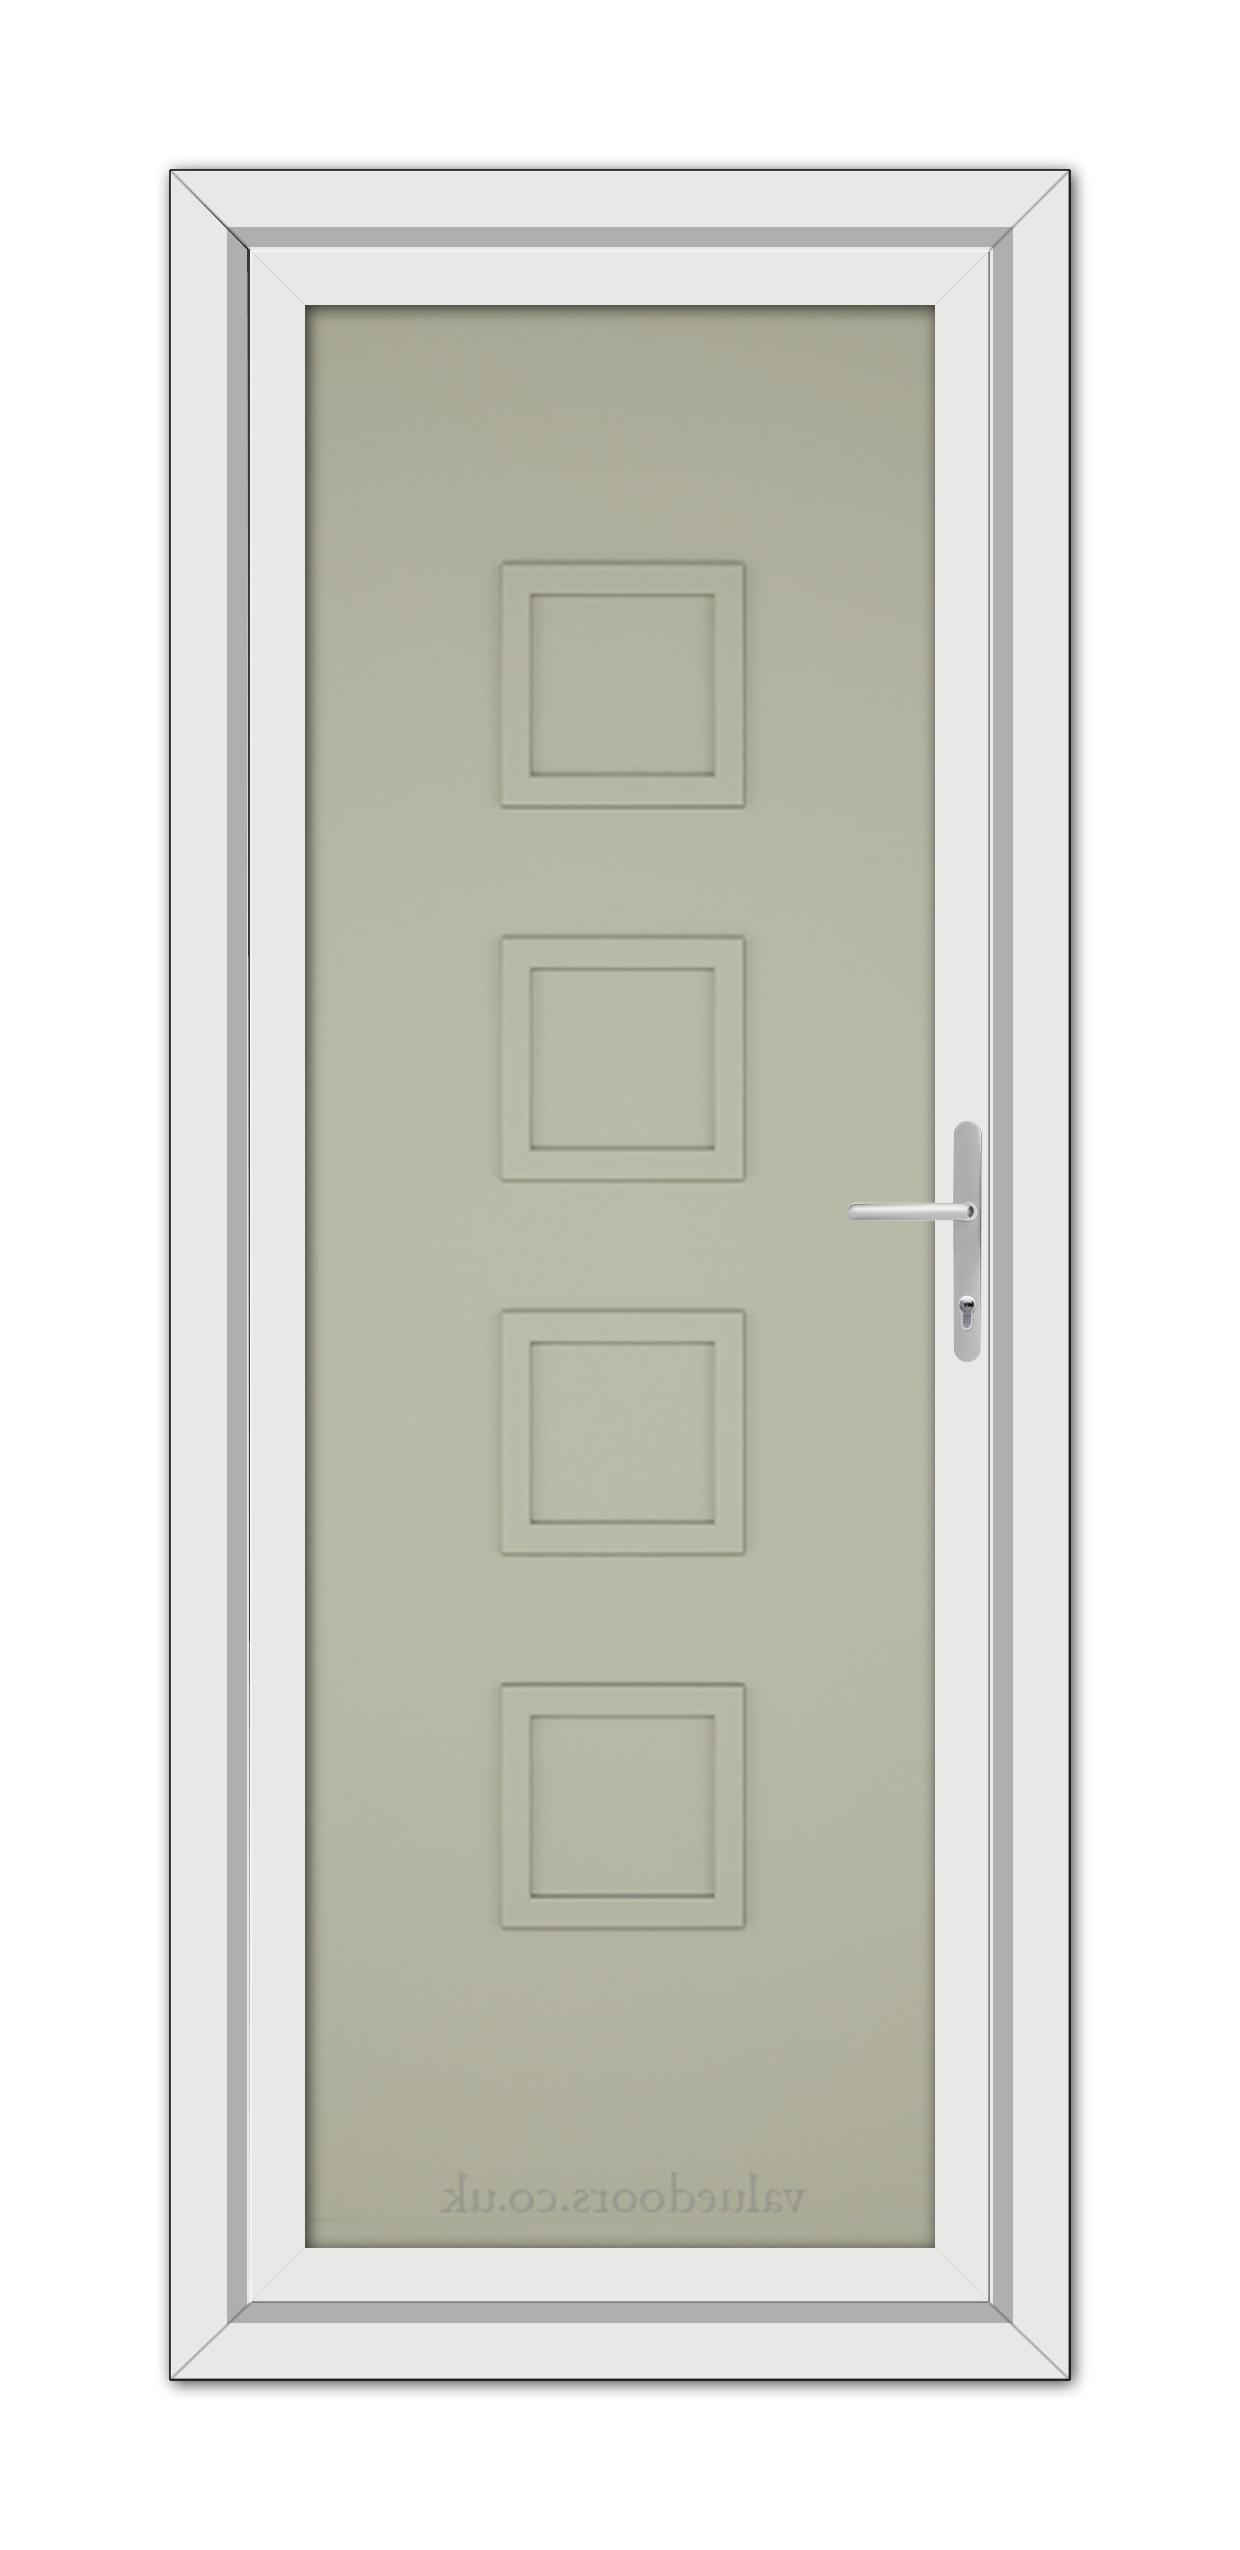 A Agate Grey Modern 5034 Solid uPVC door featuring four rectangular panels and a metallic handle, set within a white frame.